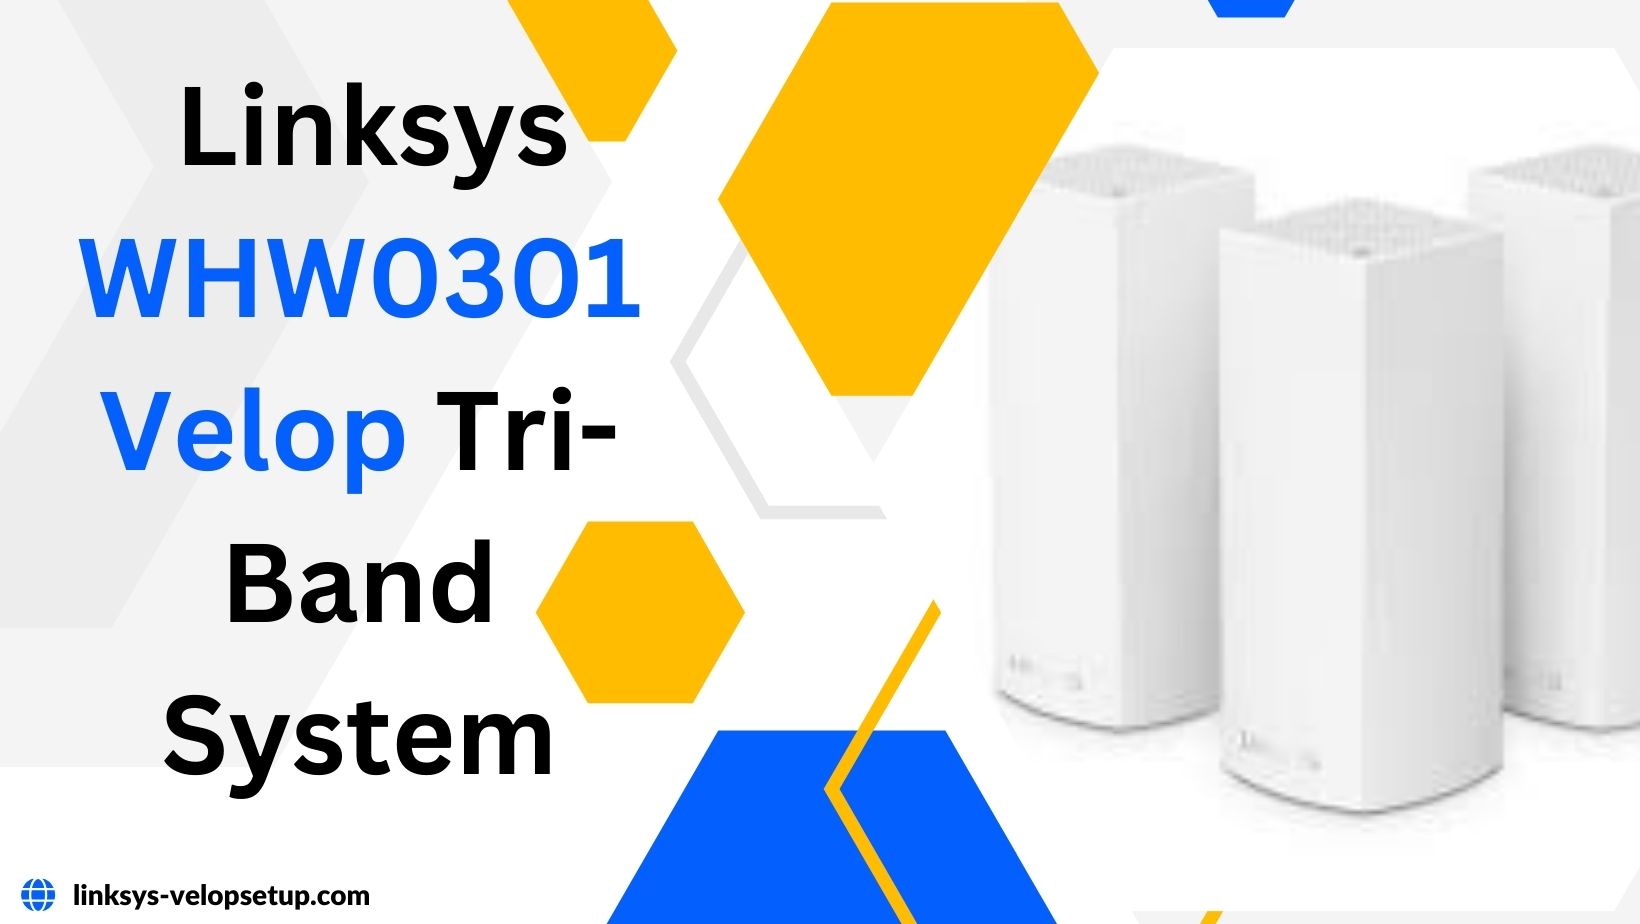 You are currently viewing The Ultimate Guide to Setting Up Your Linksys WHW0301 Velop Tri-Band System